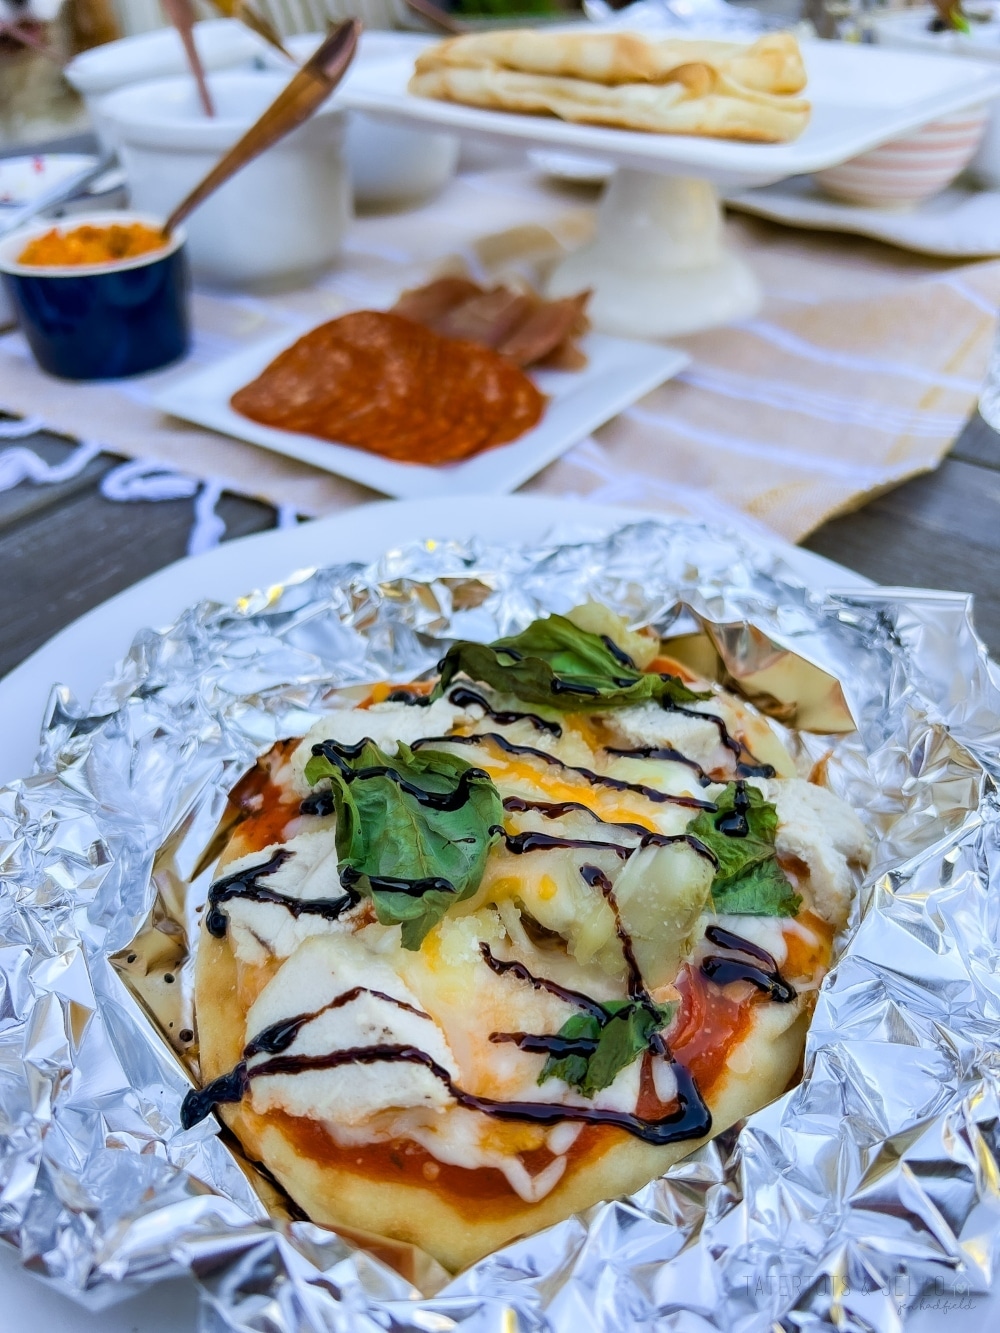 The Easiest Grilled Naan Pizzas. Take naan flatbread, toast it on the grill, add ingredients and cook for tje most delicious and easiest pizzas! 